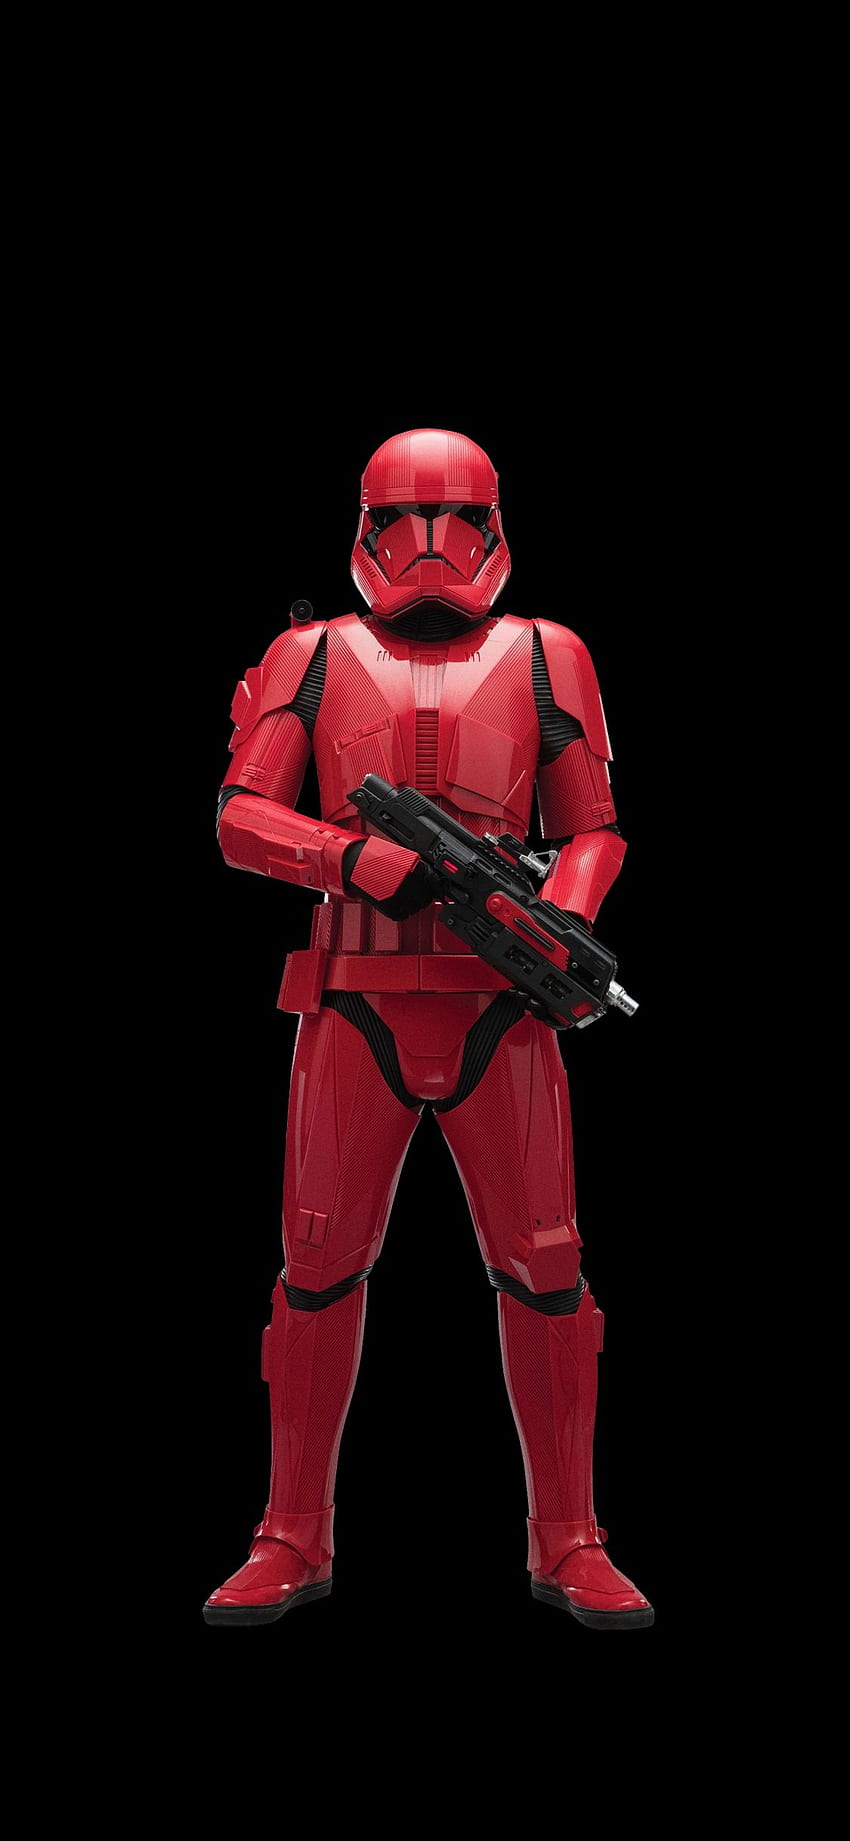 star wars: the rise of skywalker, sith trooper, stormtrooper, iphone x , background, 23132 HD phone wallpaper